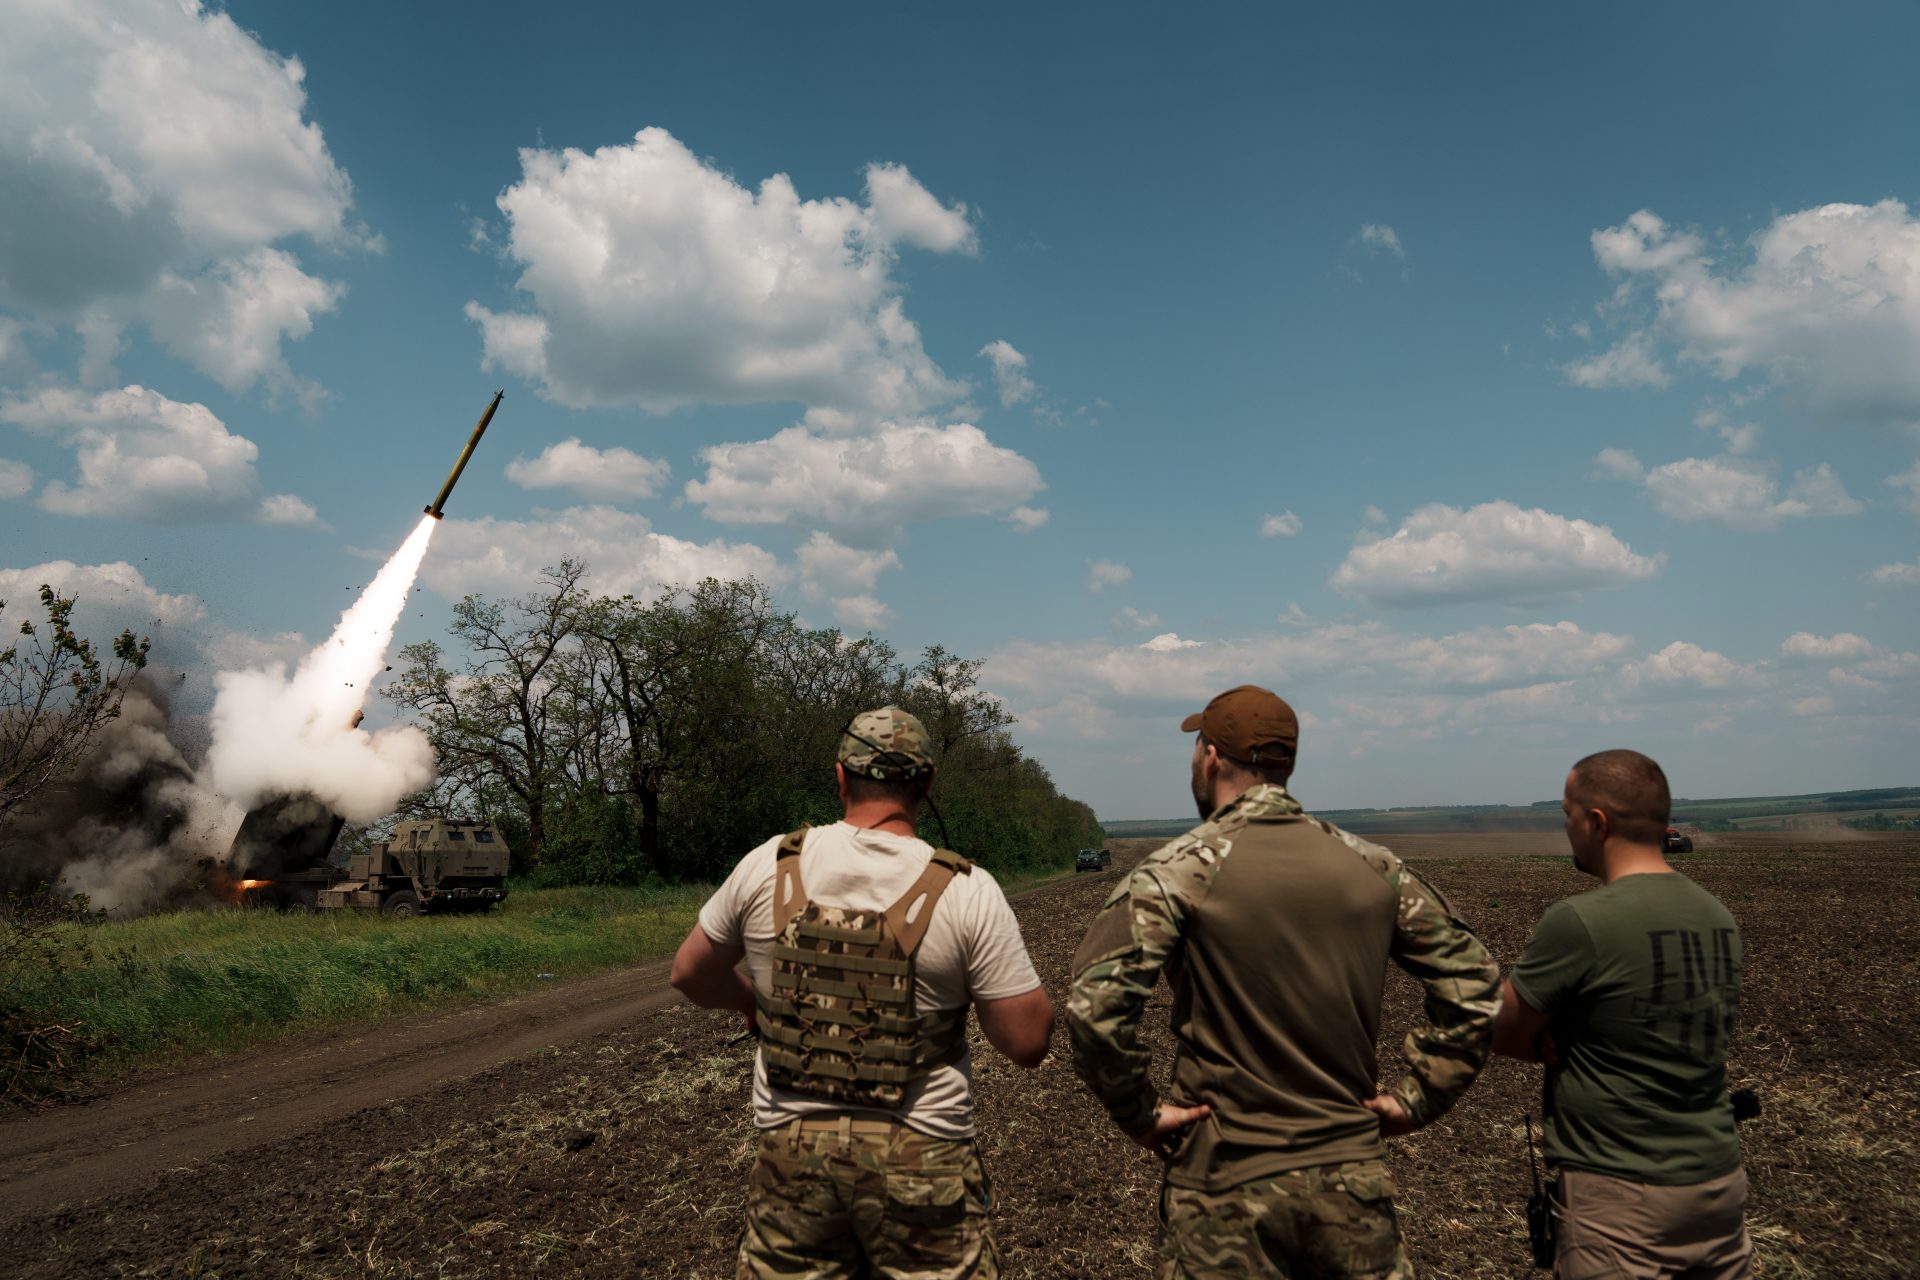 Ukraine claims it hit several Russian air defense systems in recent strike